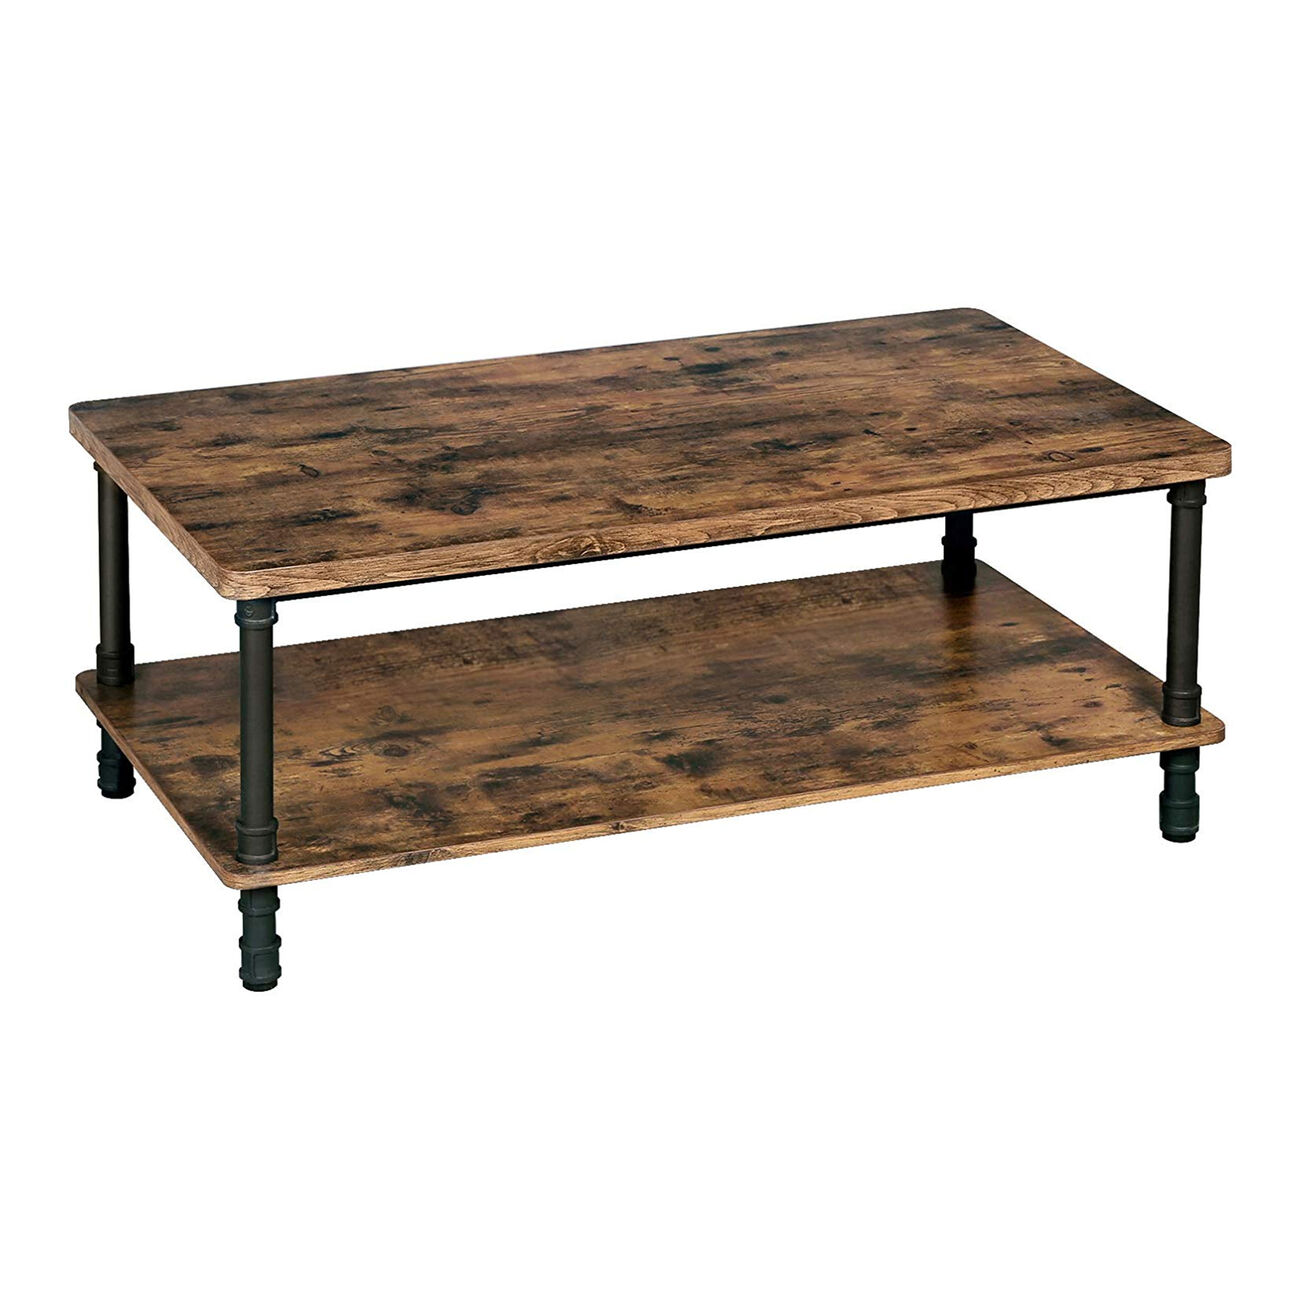 Wooden Coffee Table with 1 Bottom Shelf and Grain Details, Brown